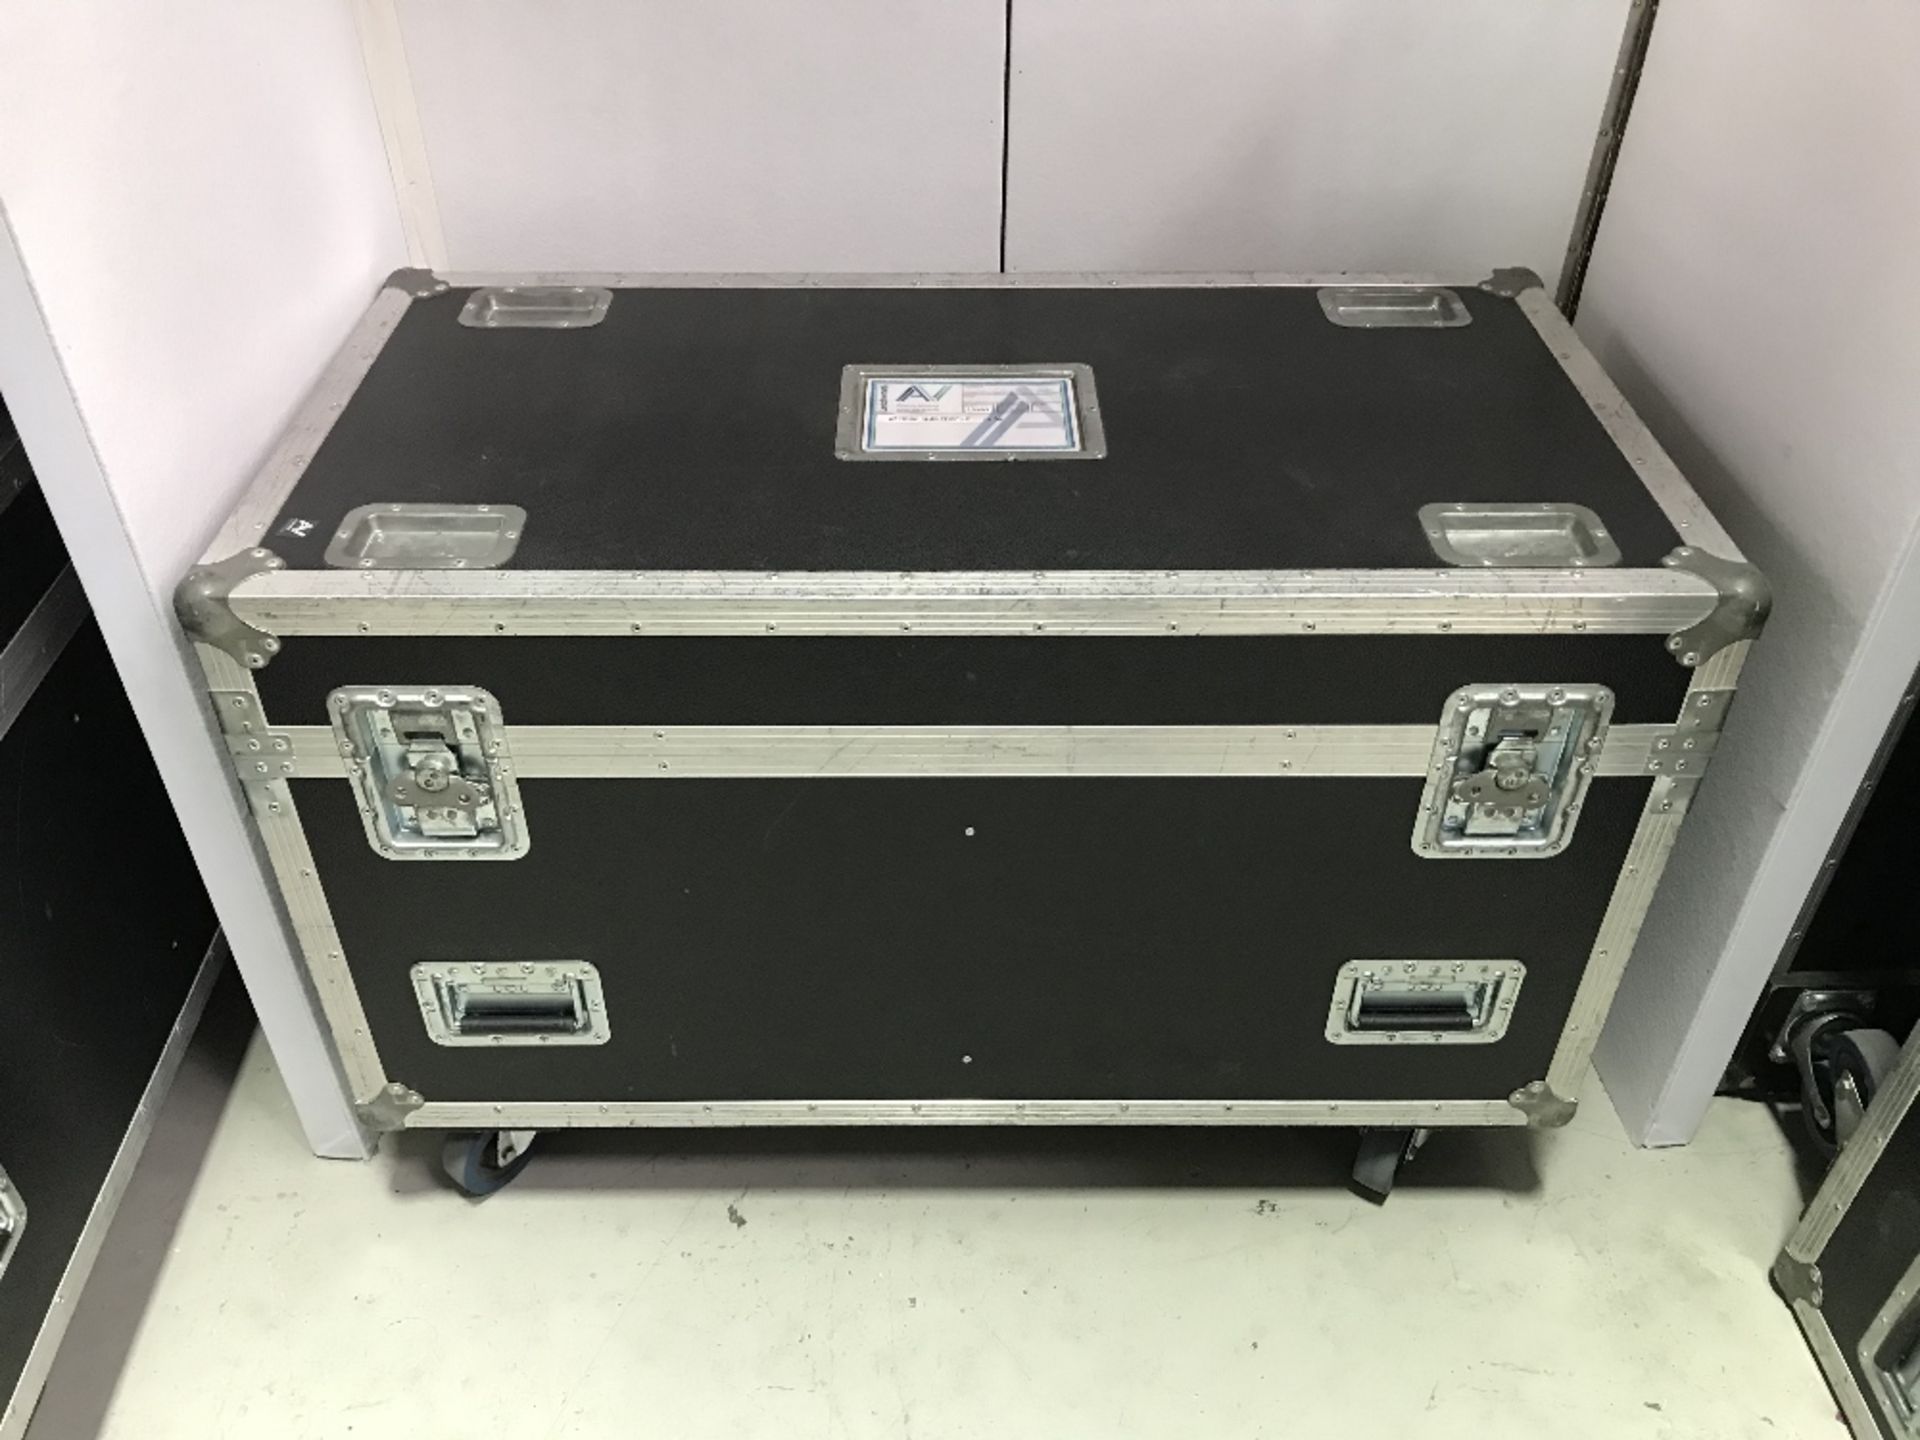 Robe Robin DL4S Profile Moving Light With Heavy Duty Flight Case To Include - Image 8 of 8